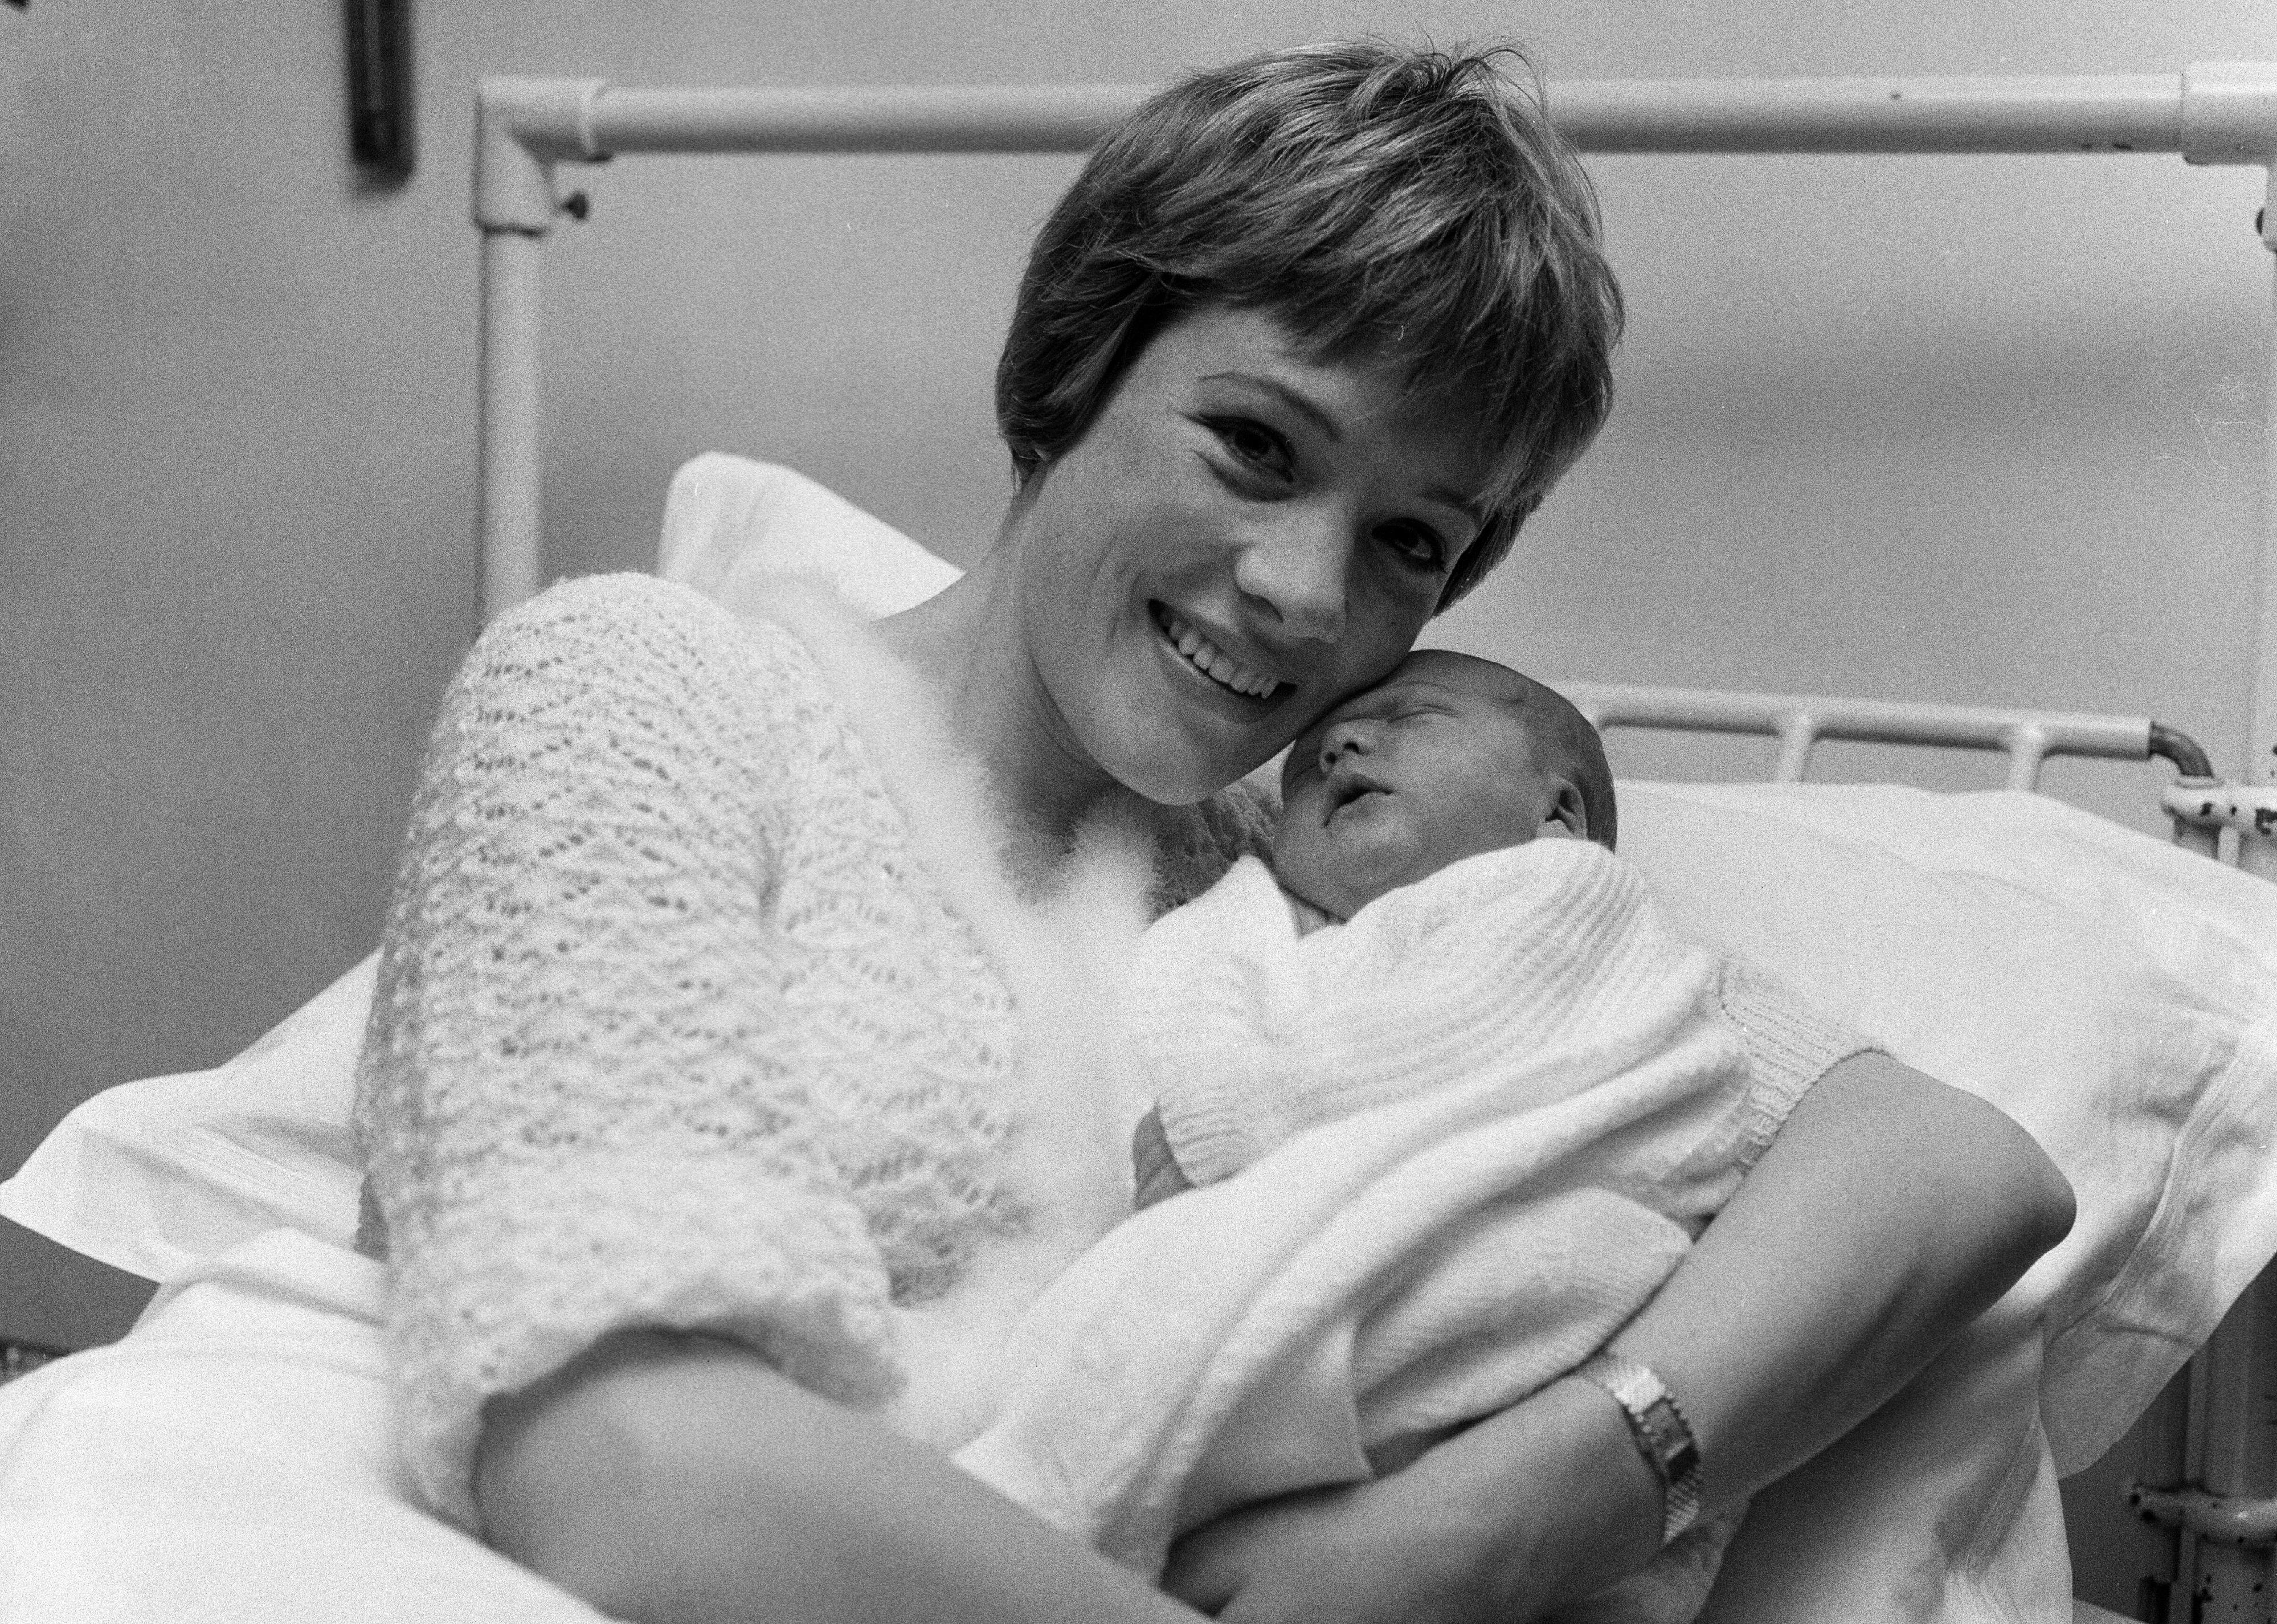 Julie Andrews of My Fair Lady fame in the London Clinic with her new daughter.